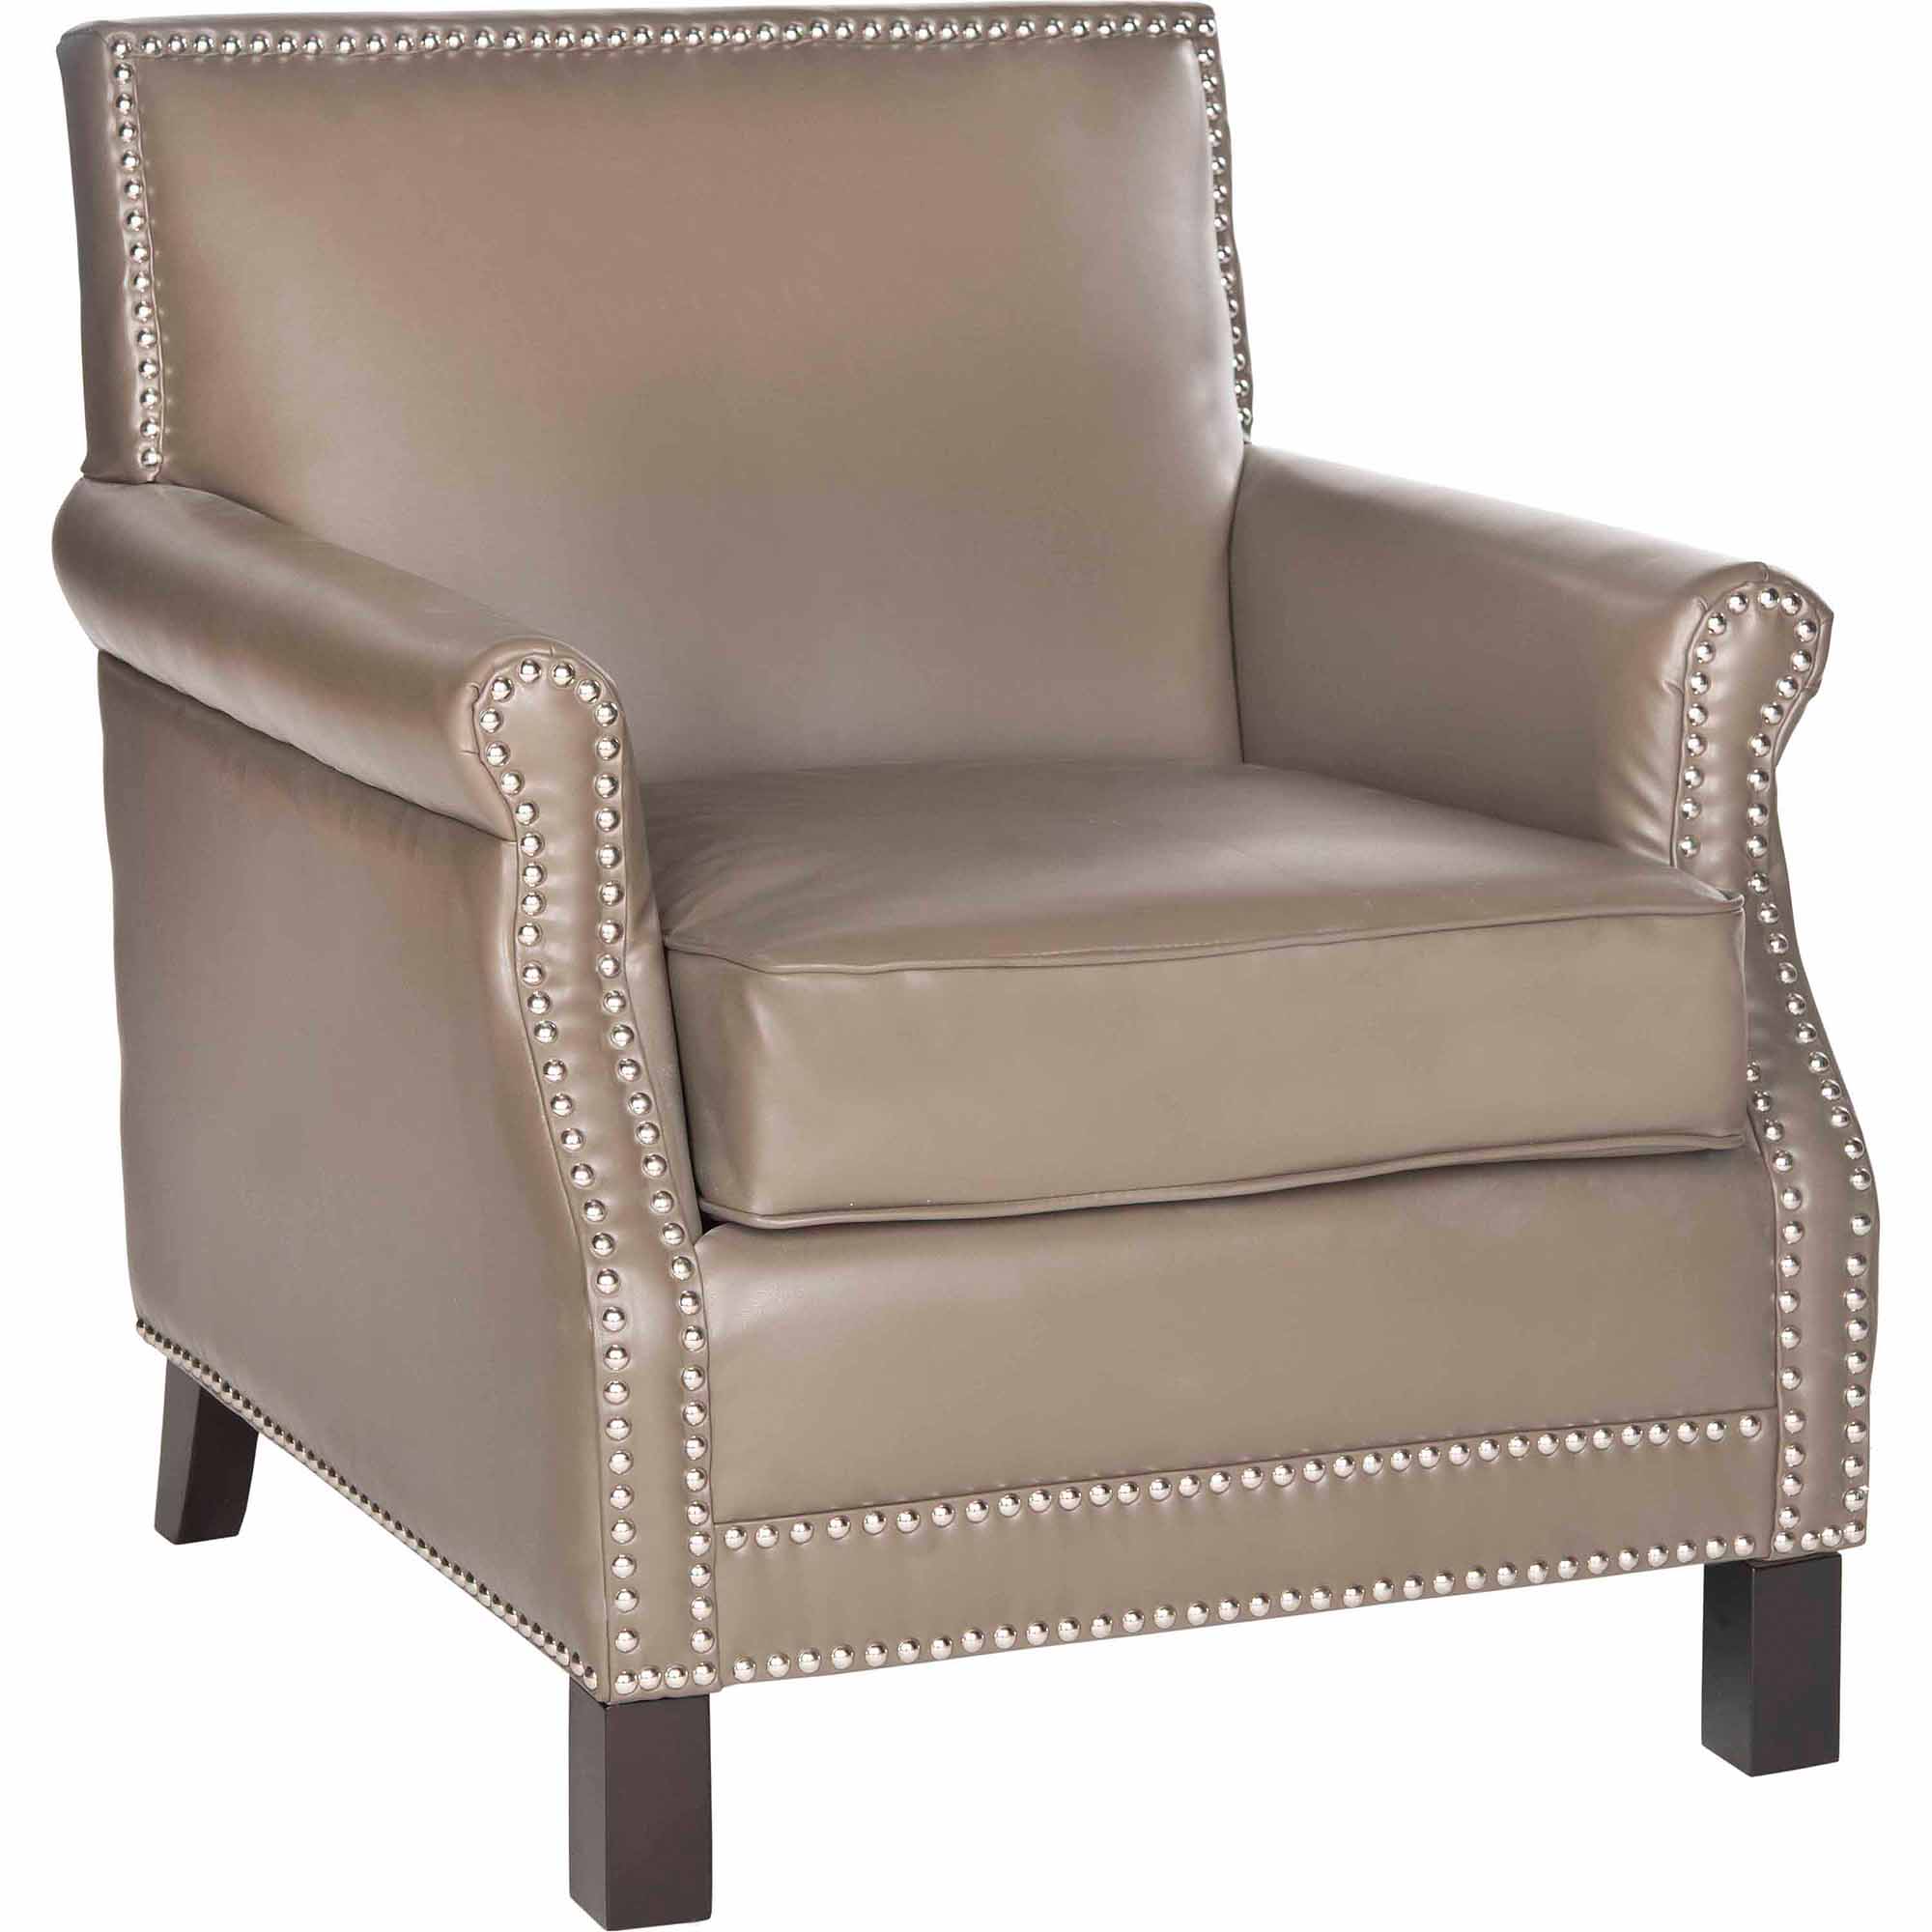 SAFAVIEH Easton Rustic Glam Upholstered Club Chair w/ Nailheads, Clay - image 3 of 4